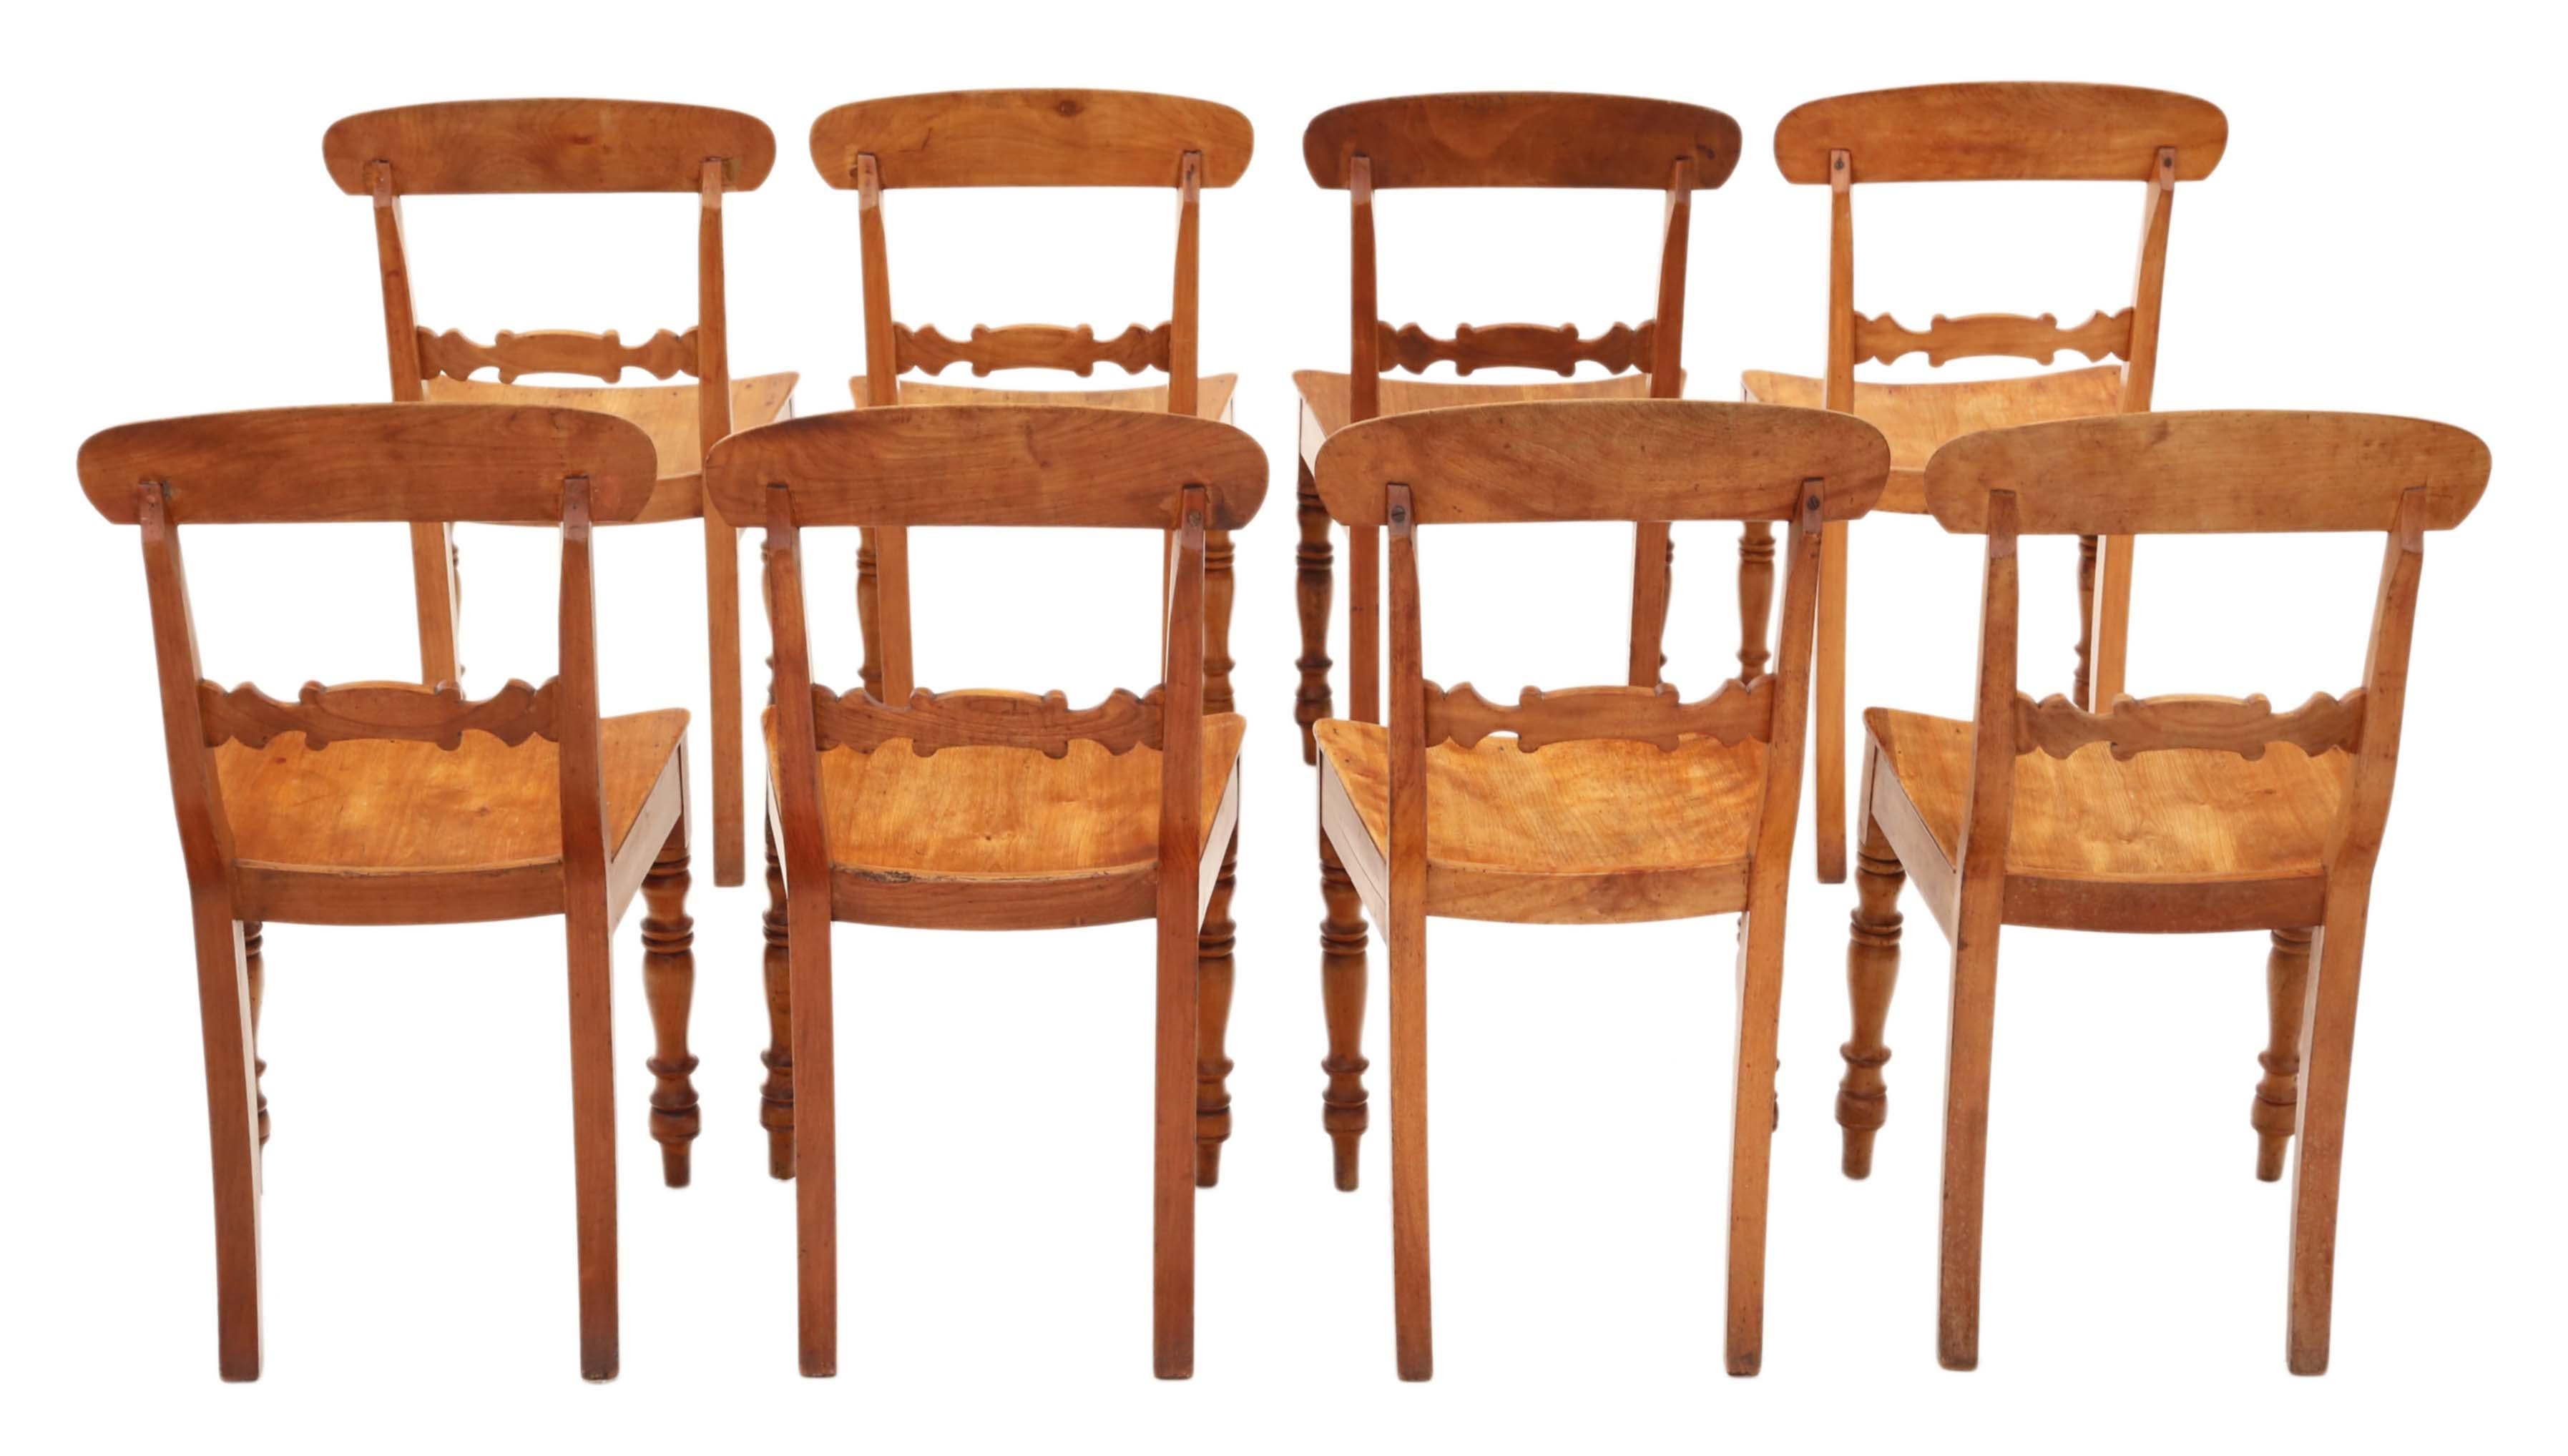 Antique fine quality set of 8 Victorian elm kitchen dining chairs C1860. Very rare, with an elegant design!

Mixed wood construction with elm seats and back. 

No loose joints.

Overall maximum dimensions: 46cmW x 45cmD x 89cmH (44cmH